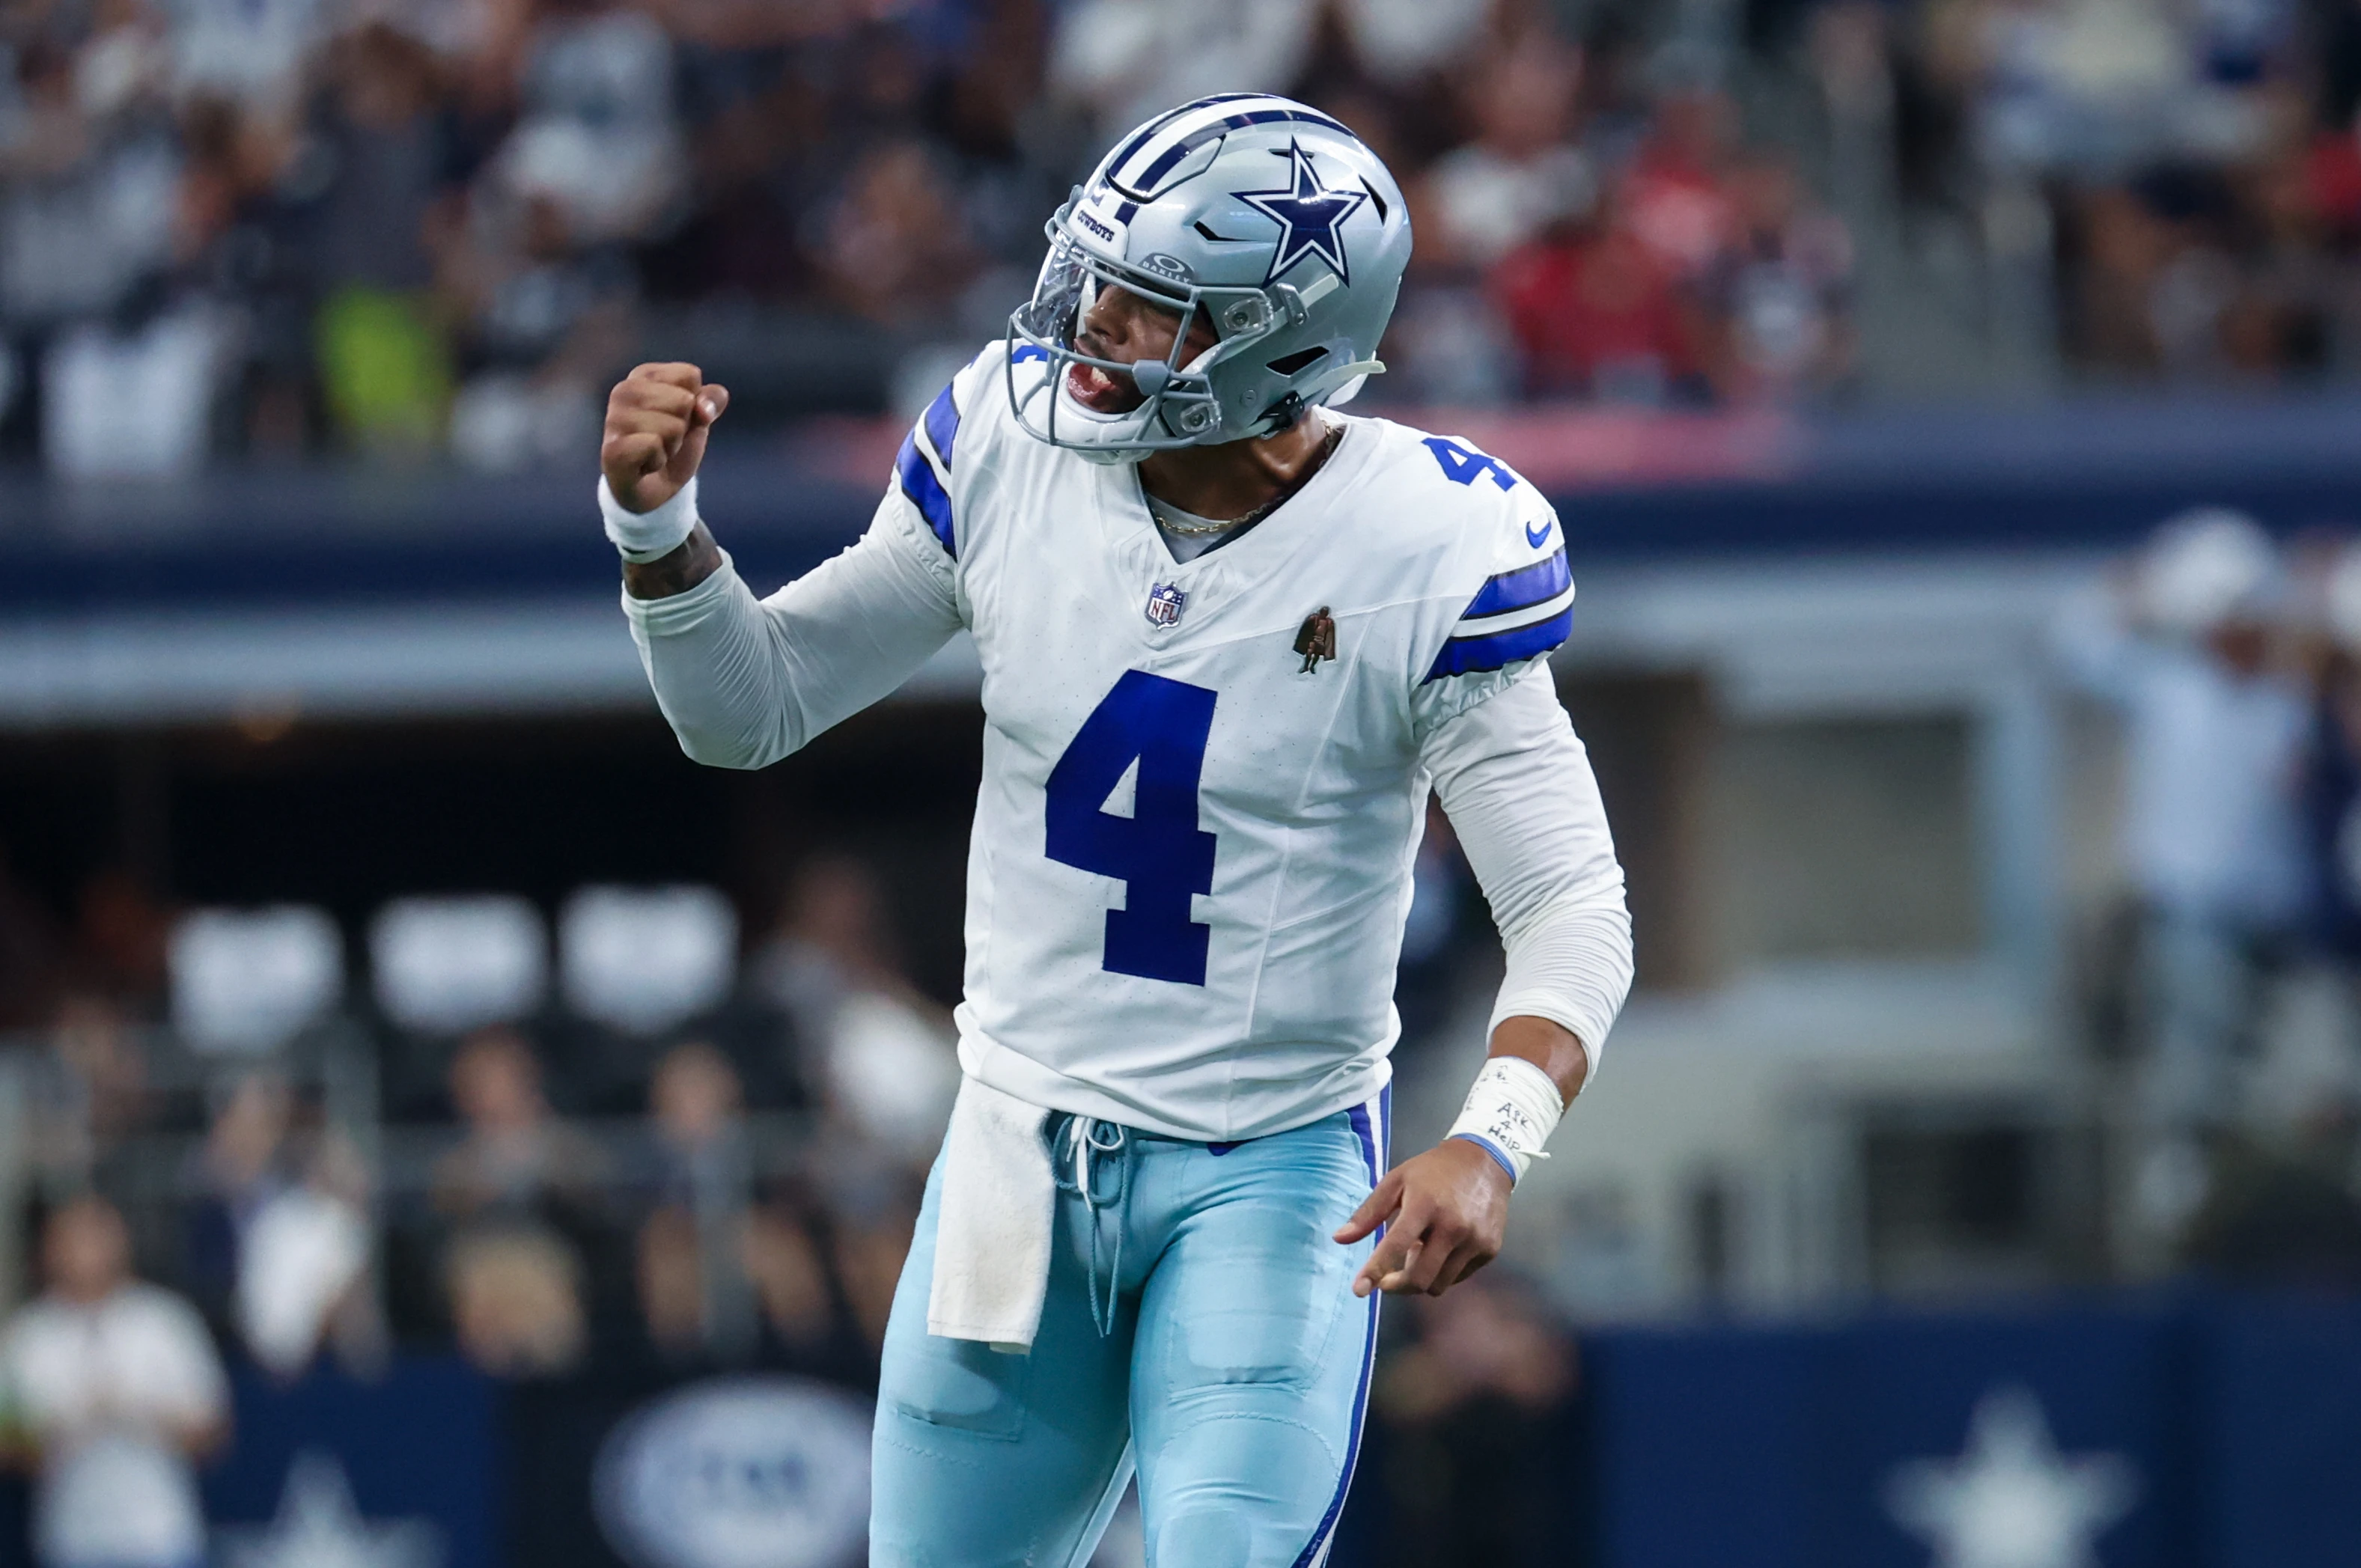 Cowboys vs. Jets Predictions, Odds & Player Props - Week 2